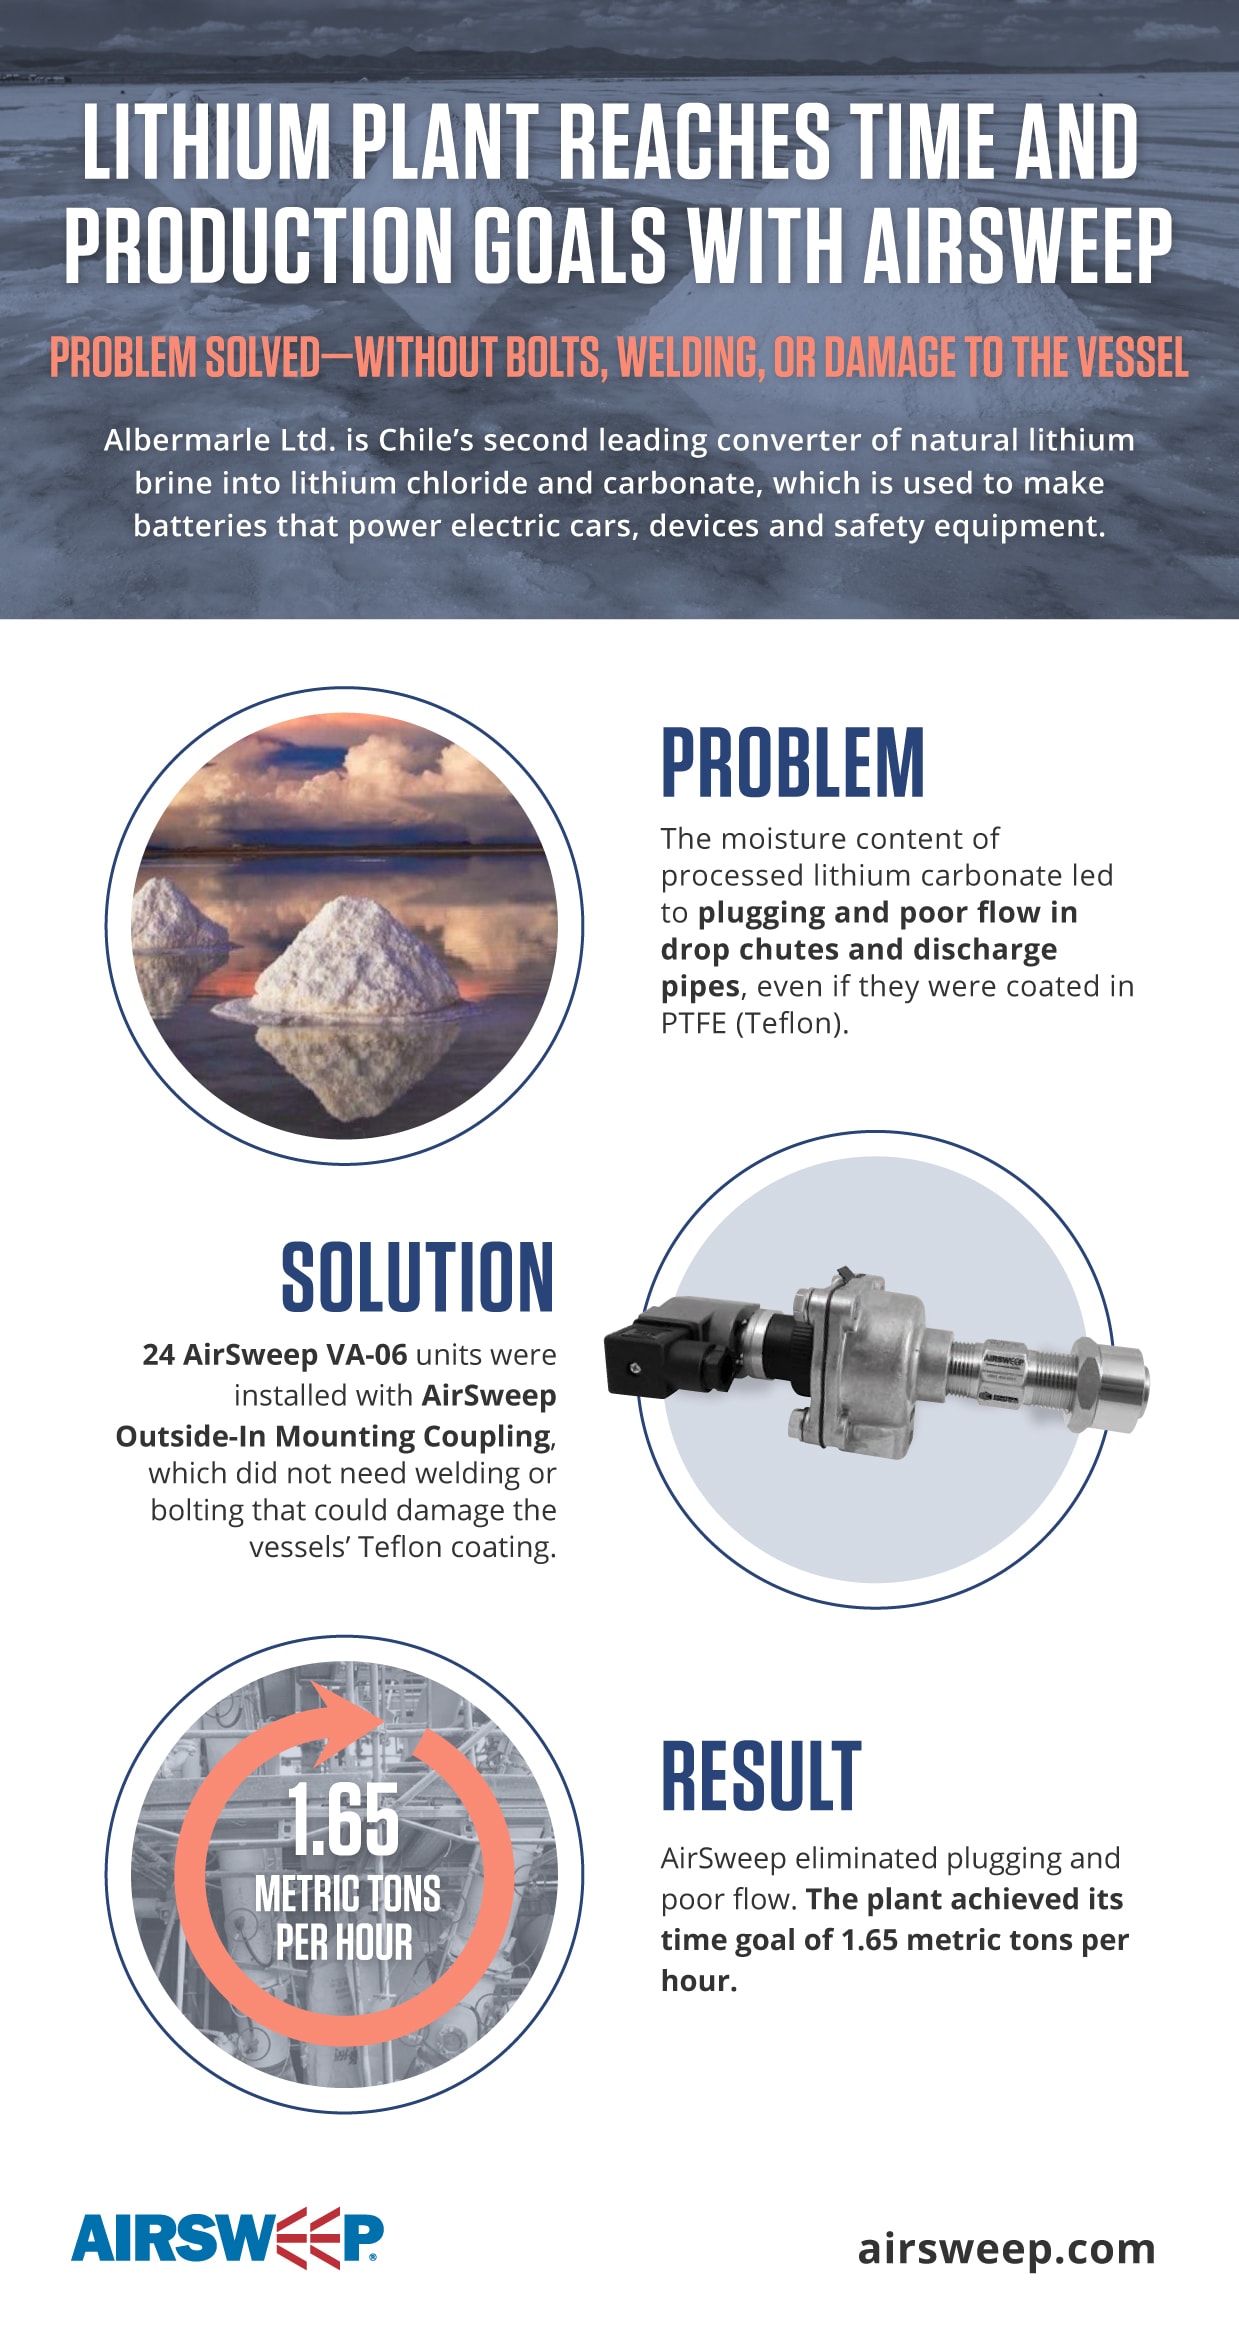 Airsweep Deicing Infographic